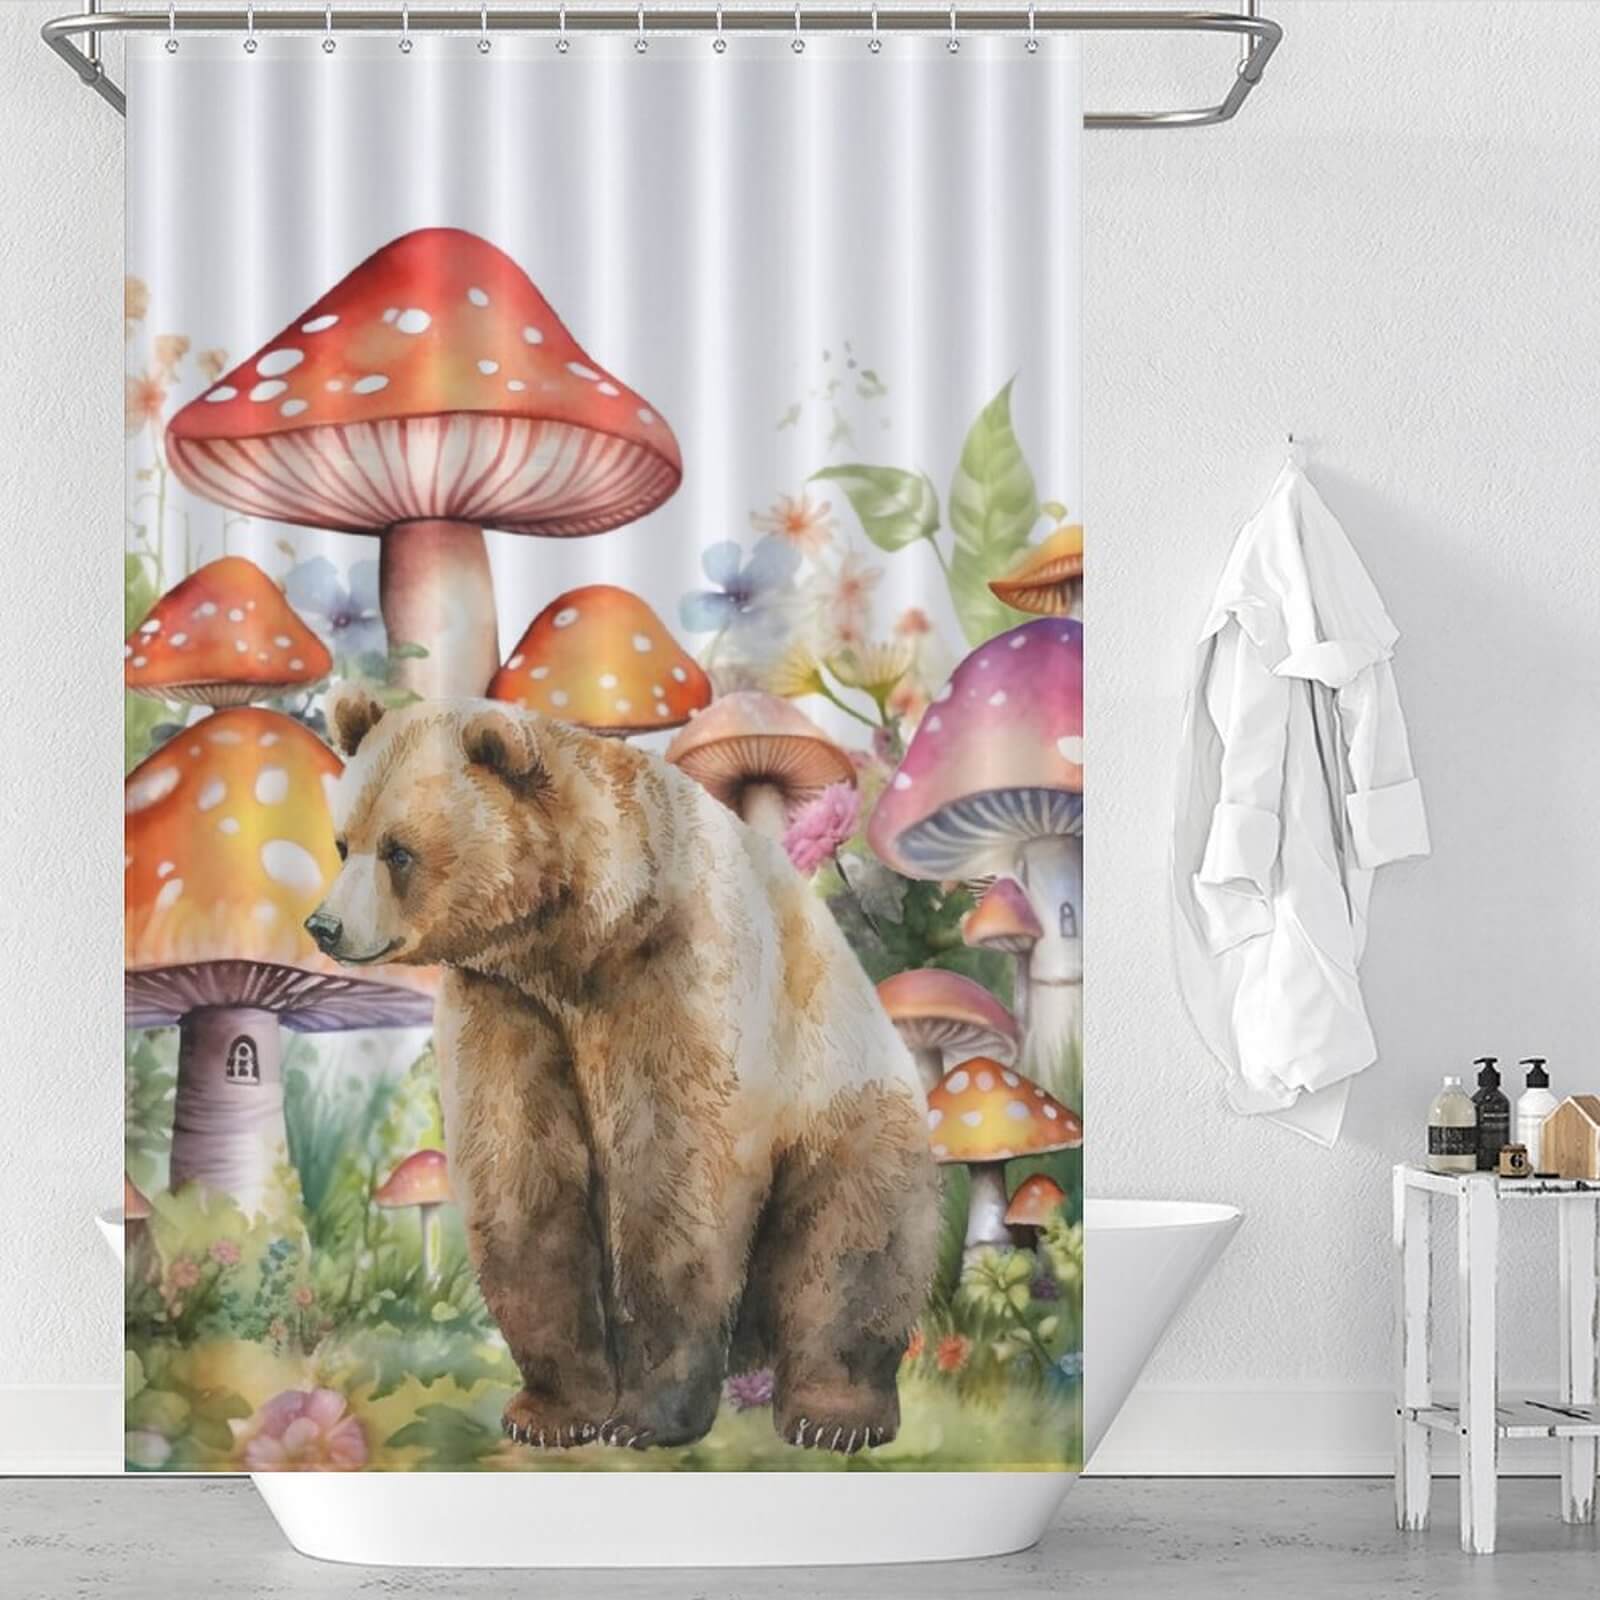 A Watercolor Mushroom Bear Shower Curtain by Cotton Cat, perfect for bathroom decor.